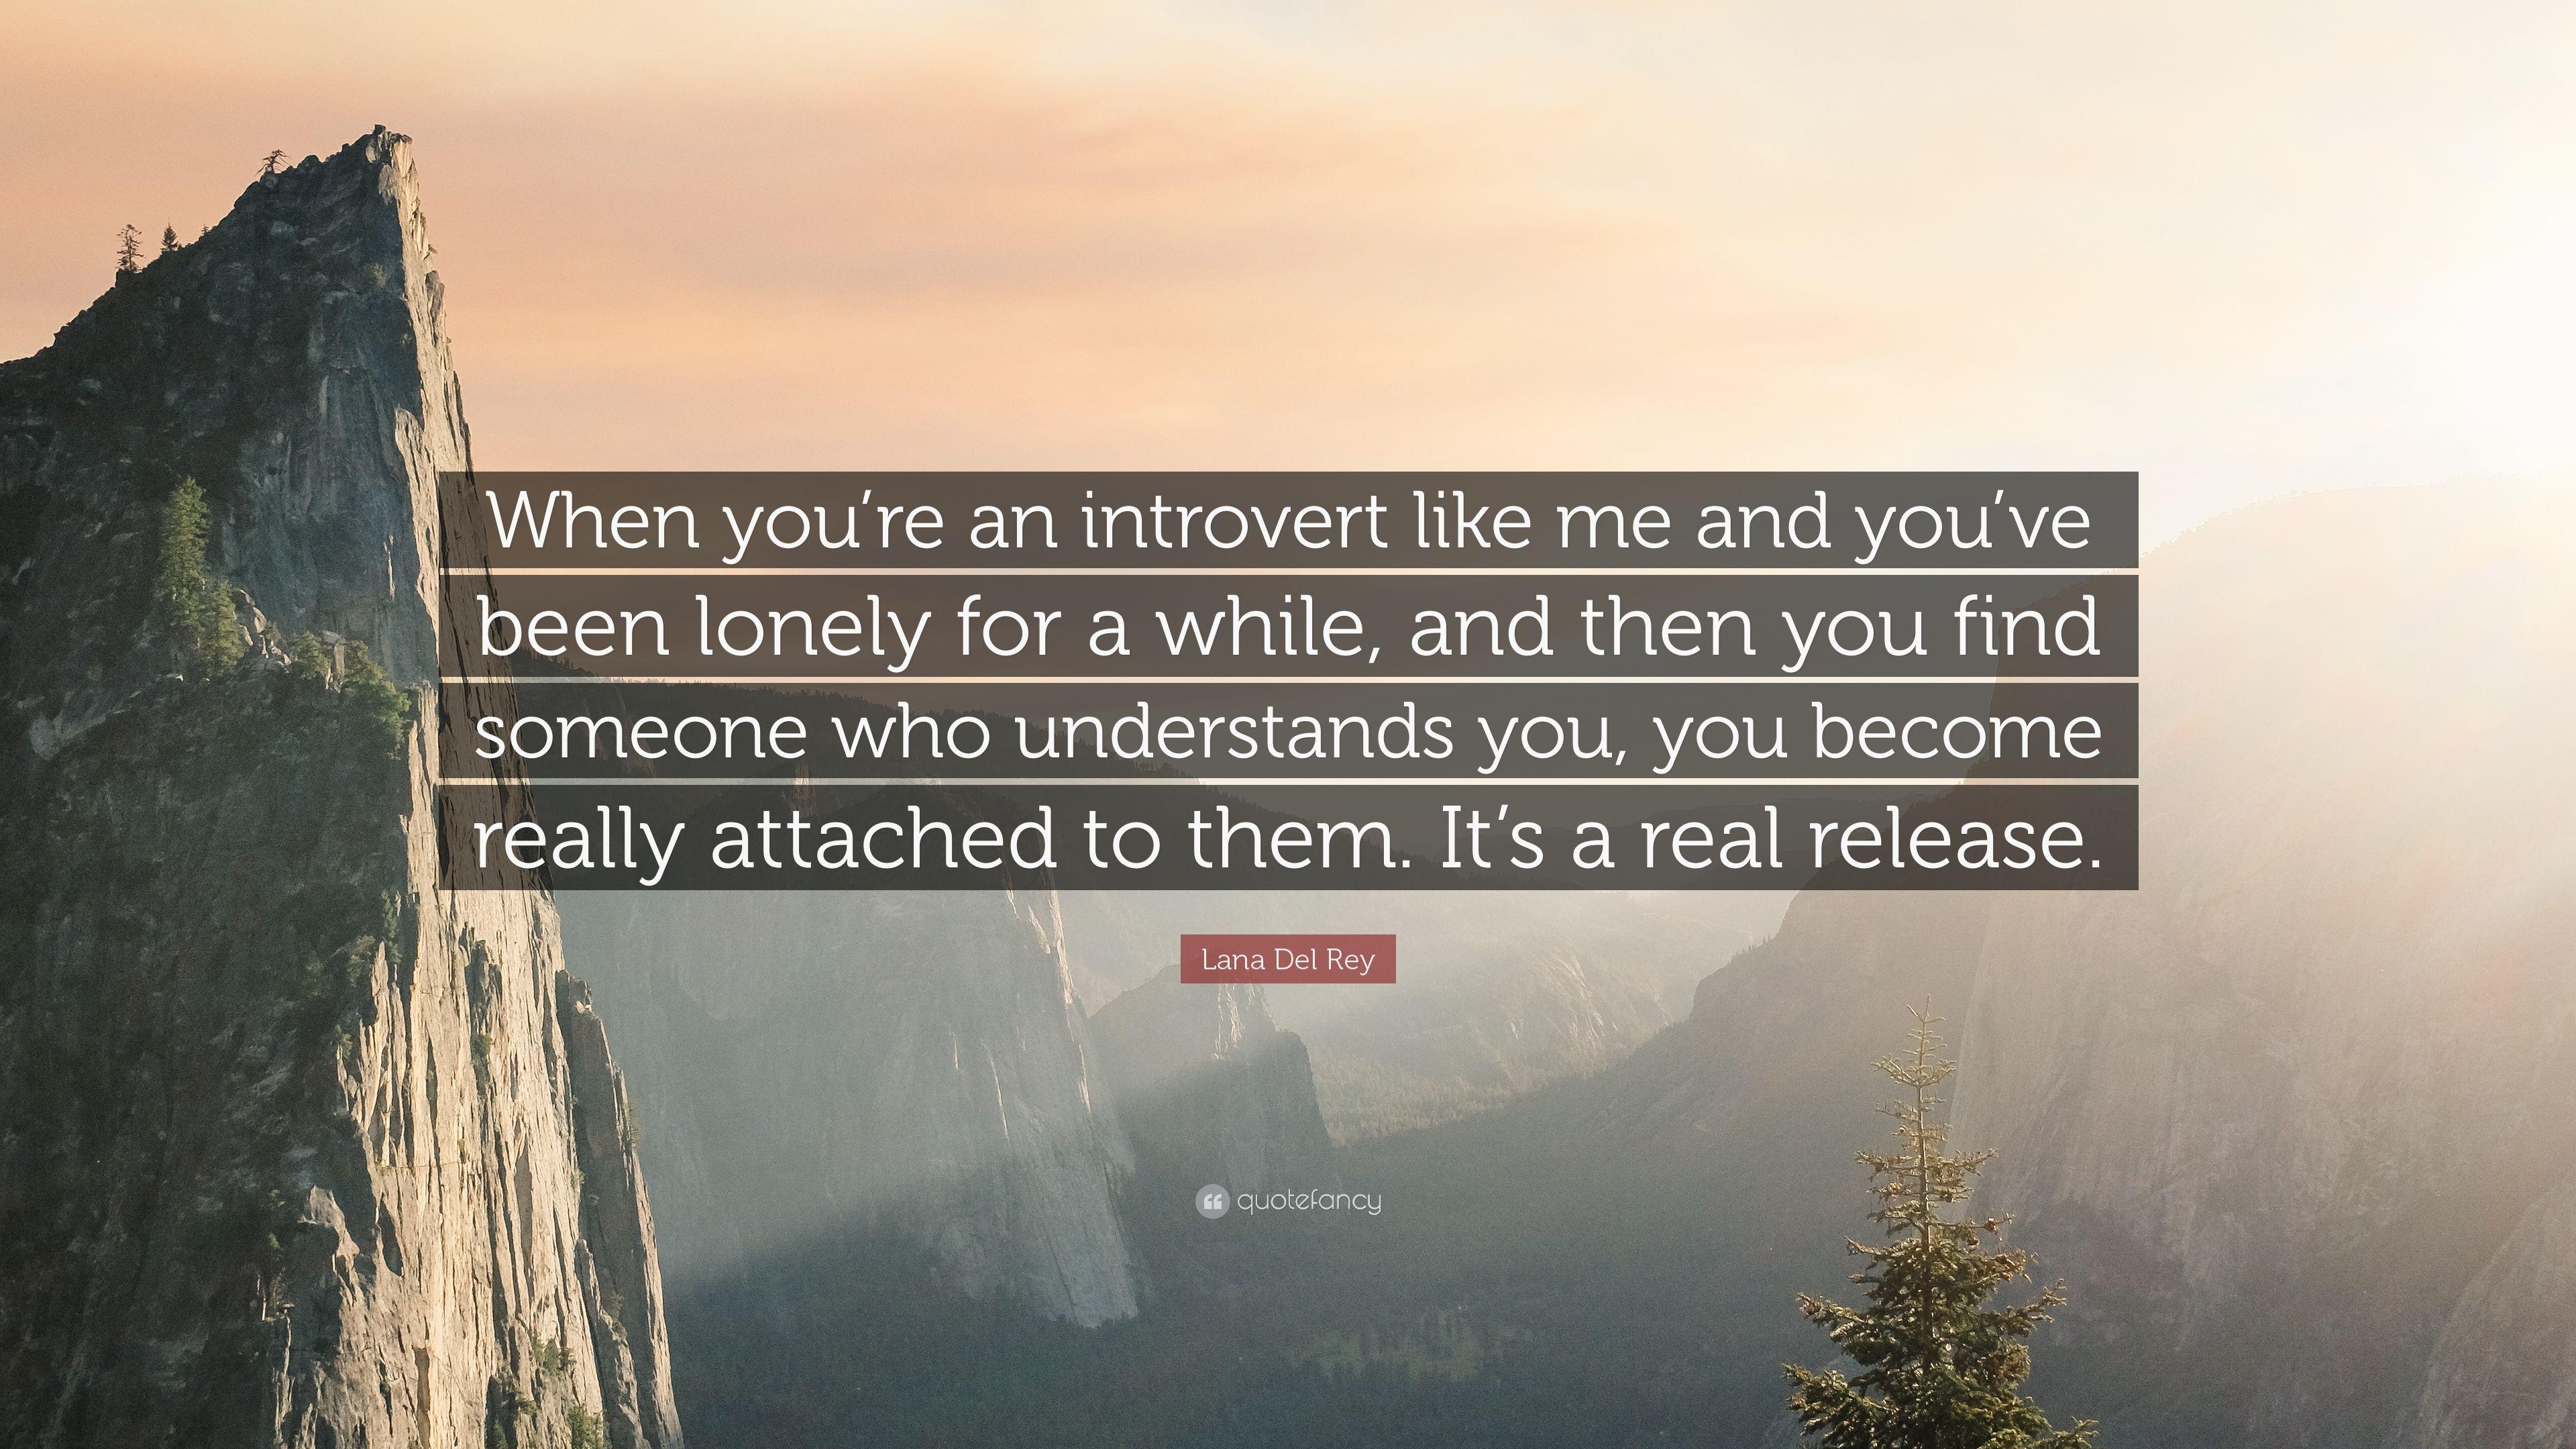 Lana Del Rey Quote: “When you're an introvert like me and you've